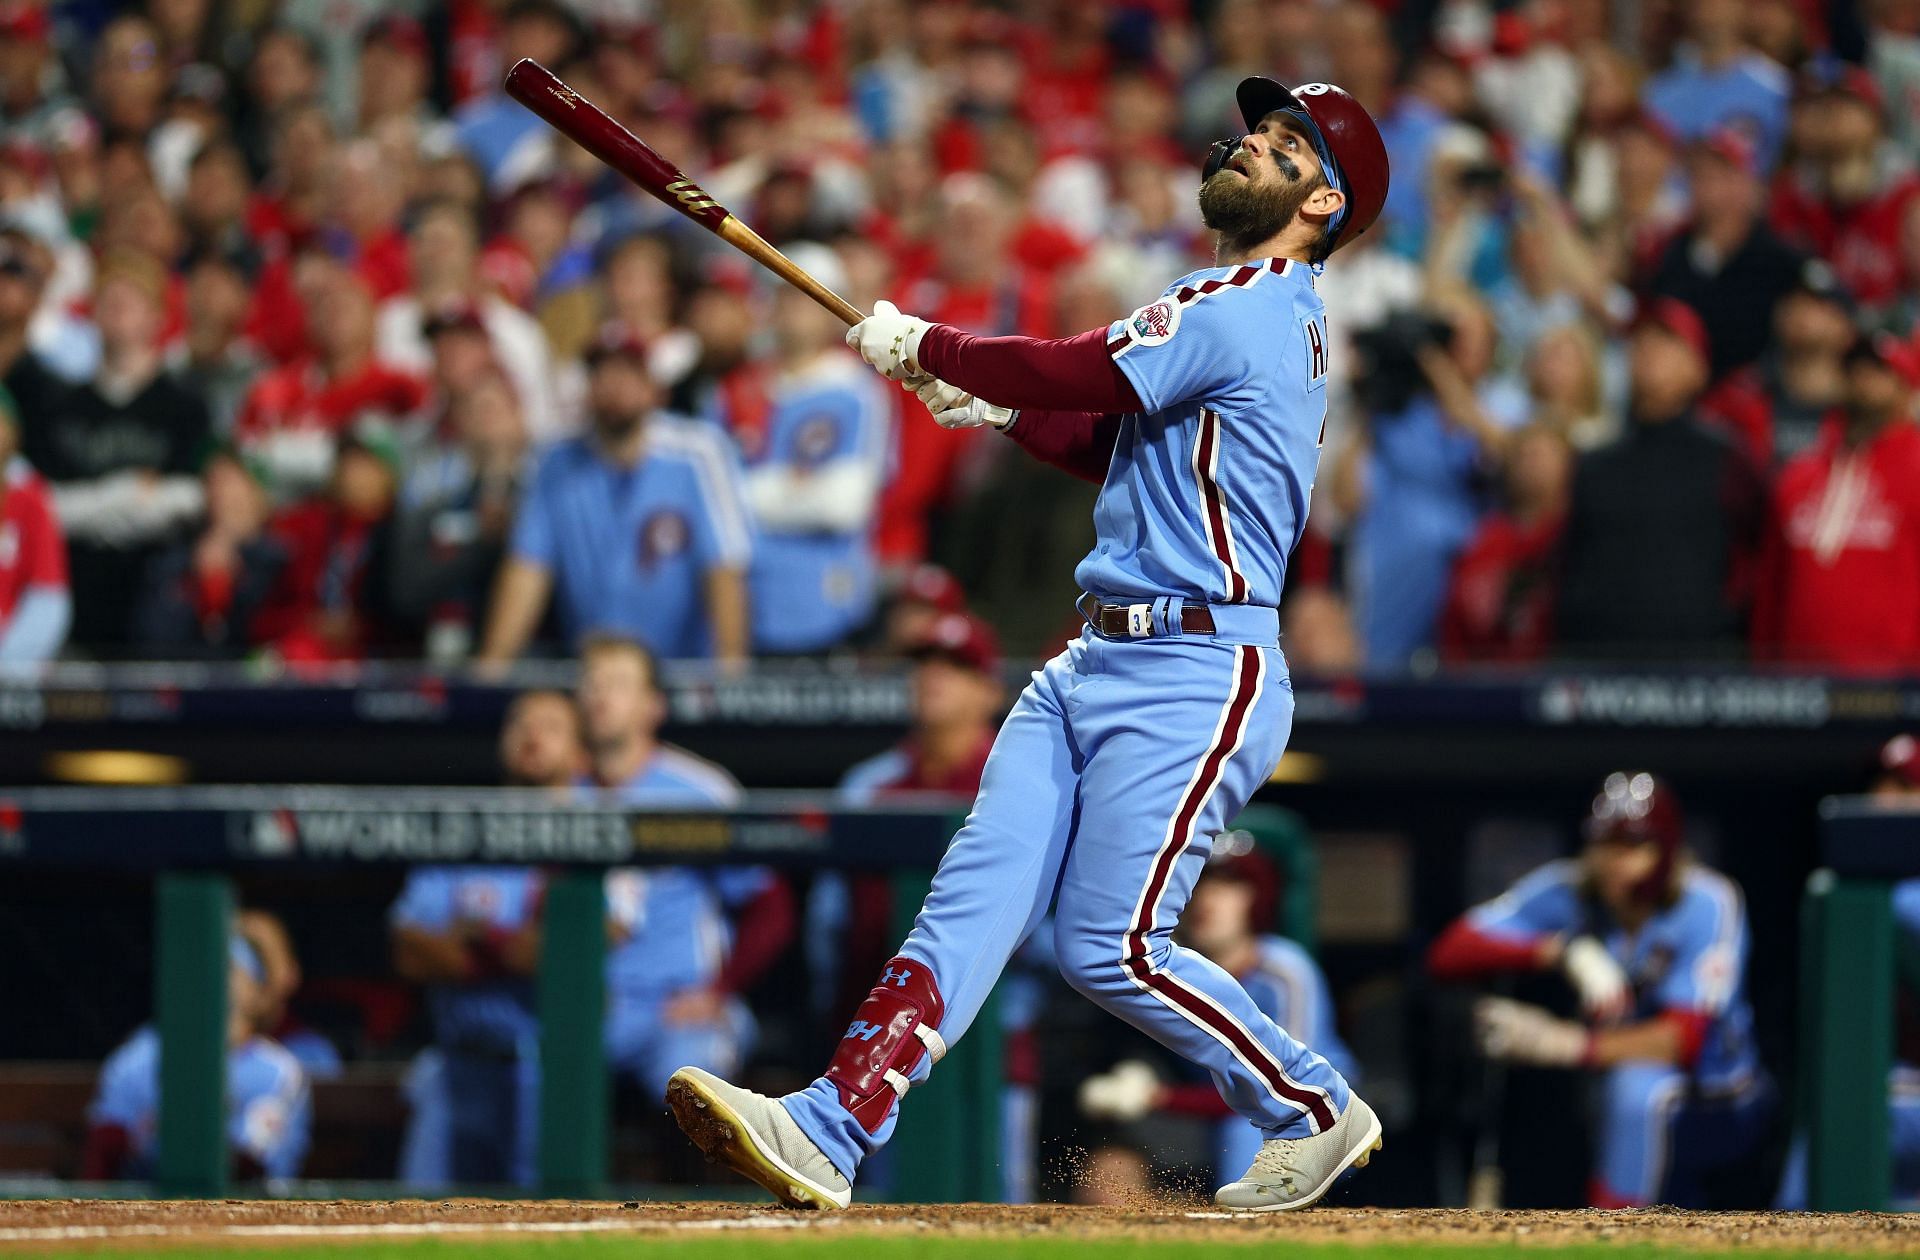 Bryce Harper of the Philadelphia Phillies at bat against the Houston Astros during the seventh inning in Game 4 of the 2022 World Series.